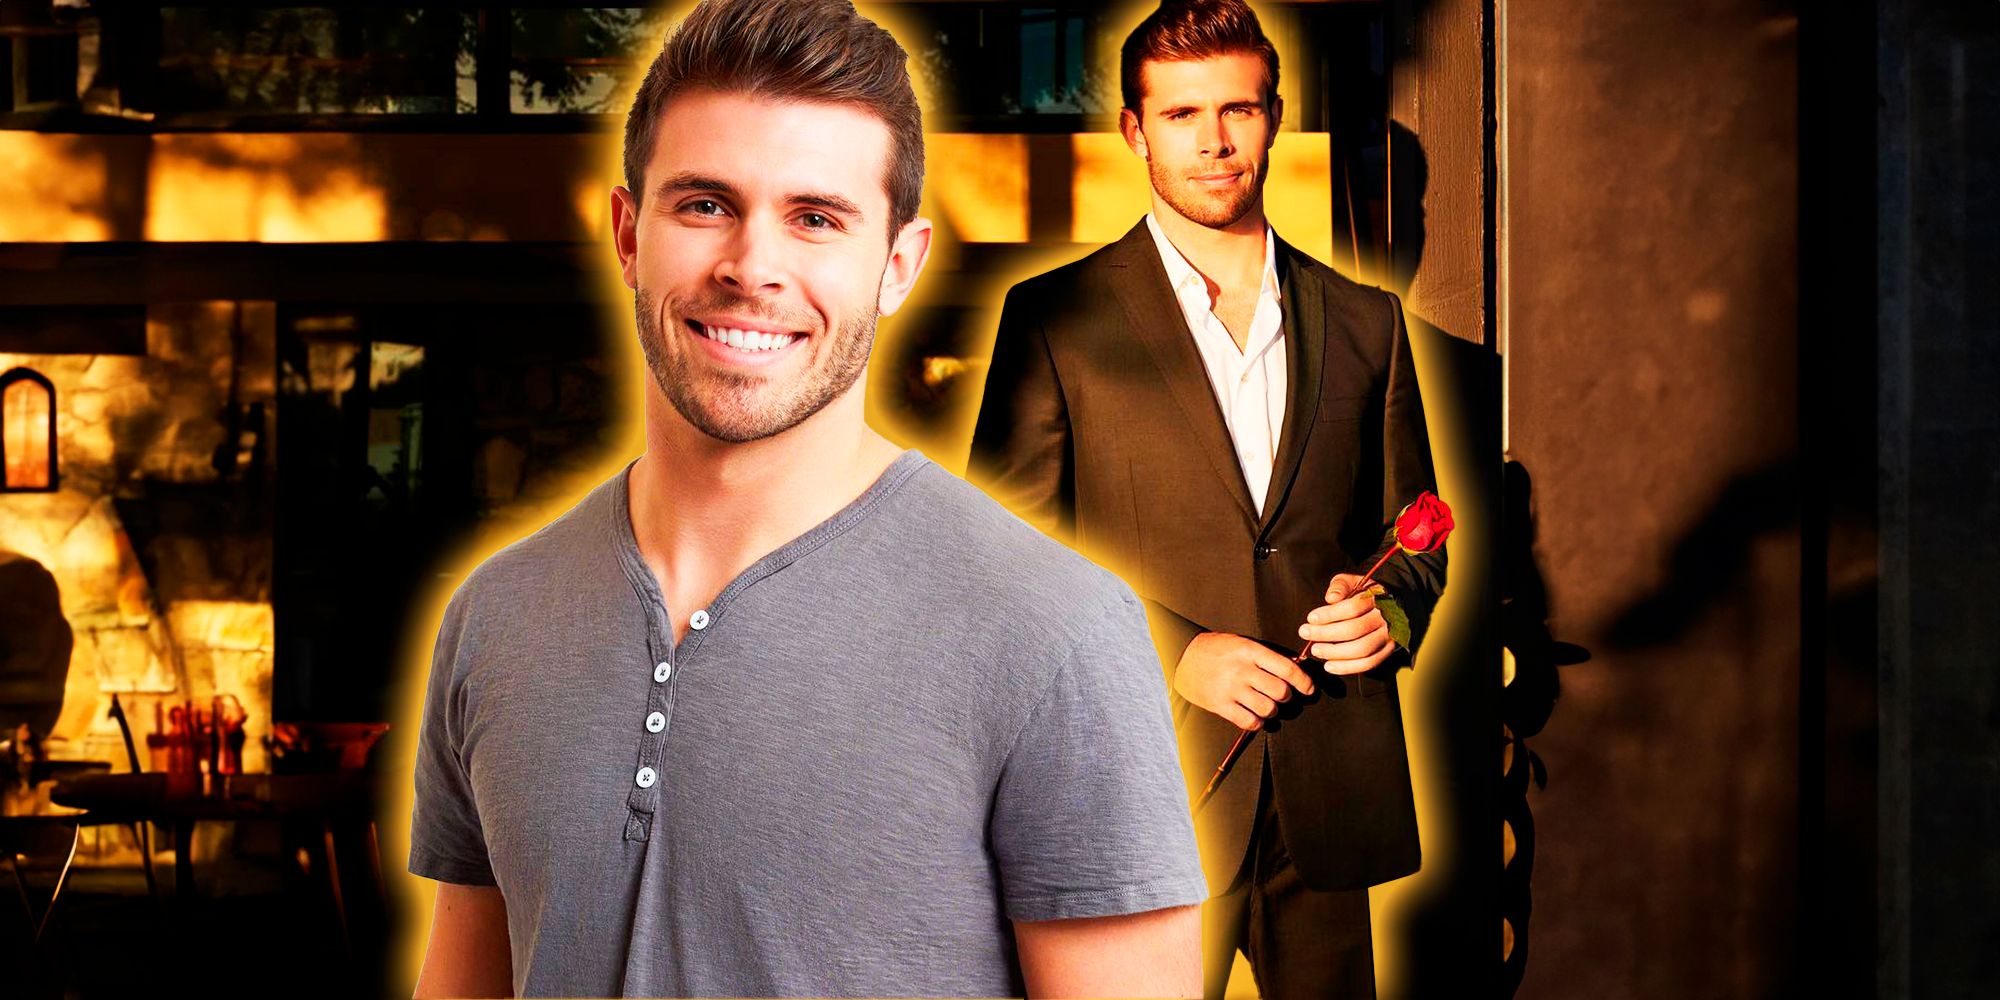 Zach Shallcross Reveals If He’s Quitting Reality TV After The Bachelor